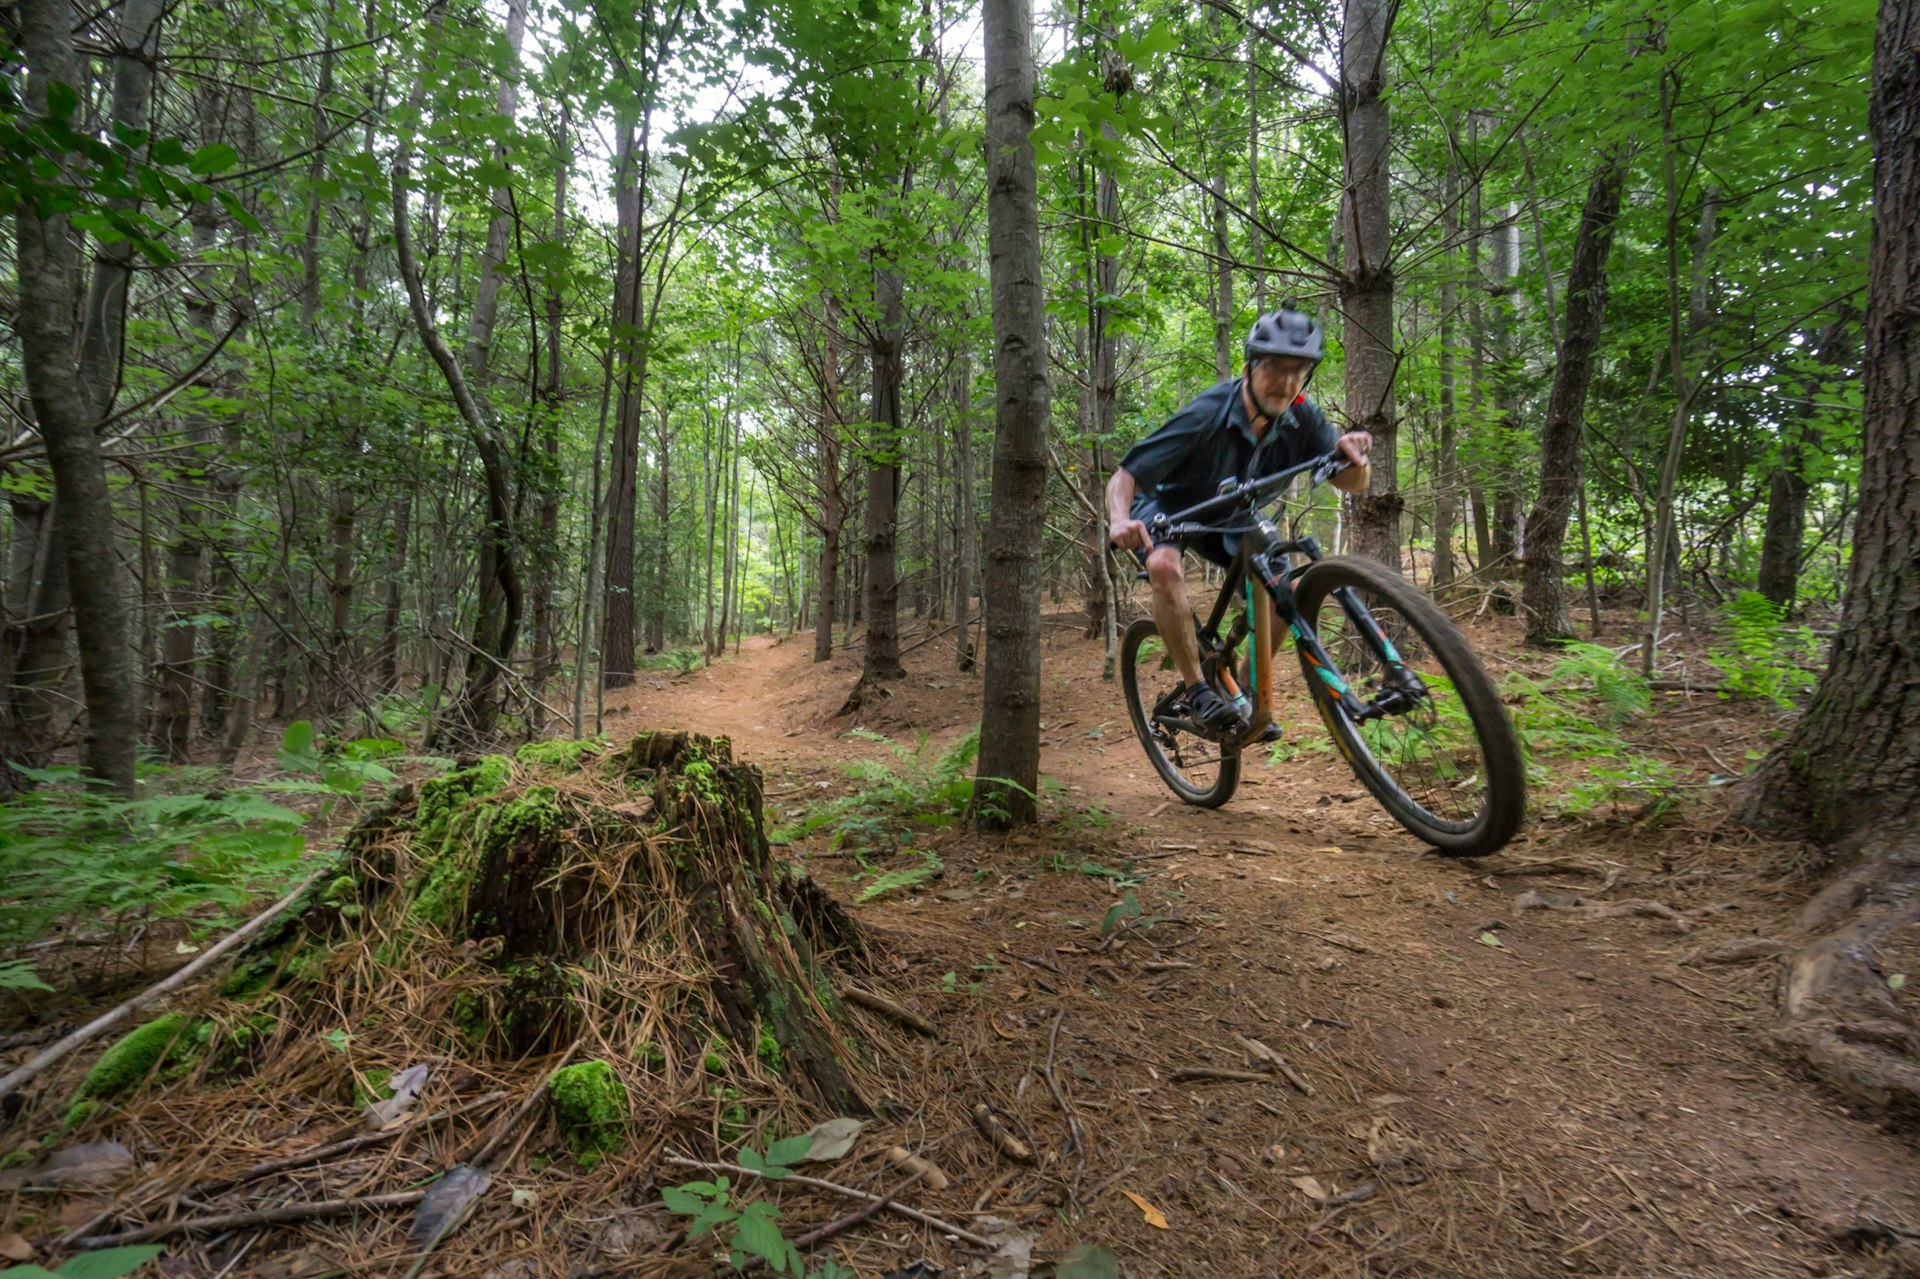 Mountain biker flies through the lush forest greenery on the trail in Lake James park, North Carolina.